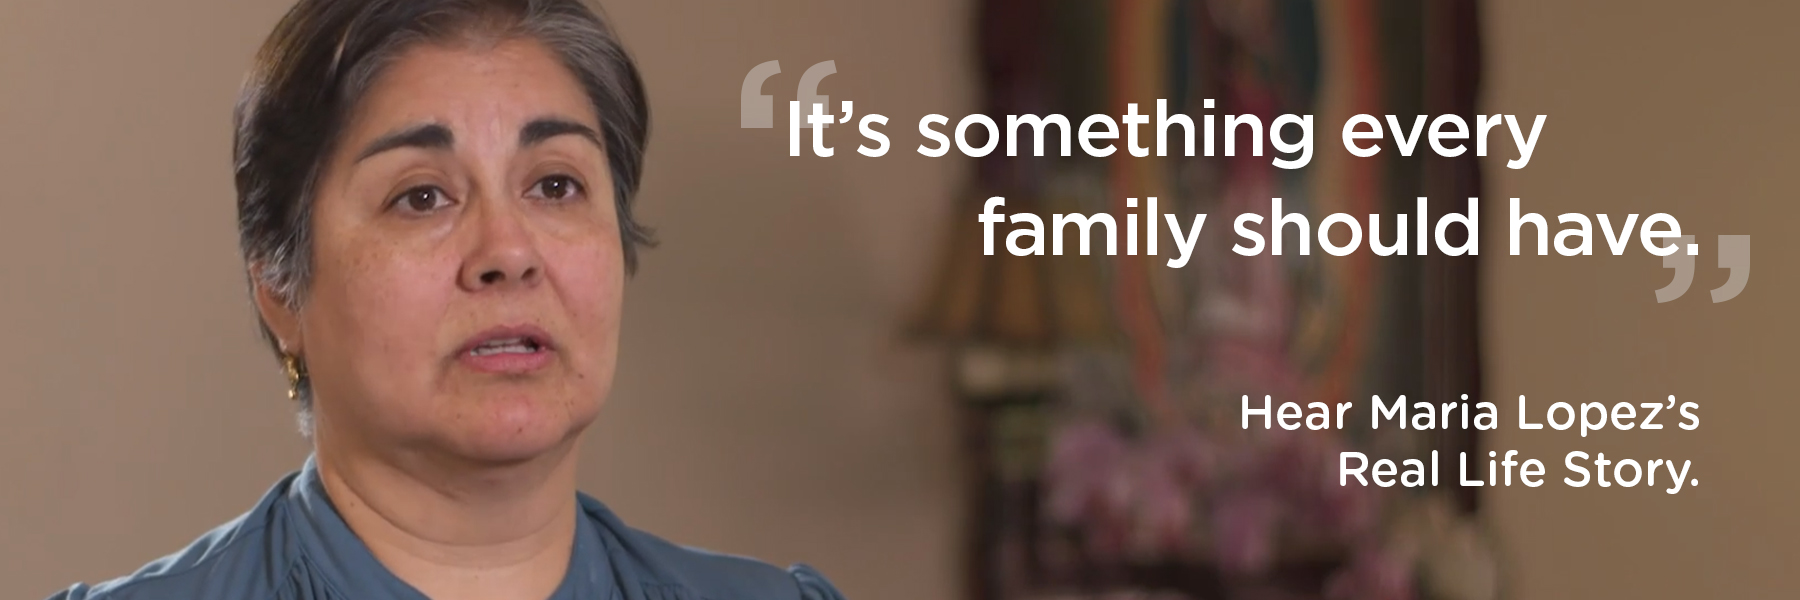 It's something every family should have. Hear Maria Lopez's Real Life Story.